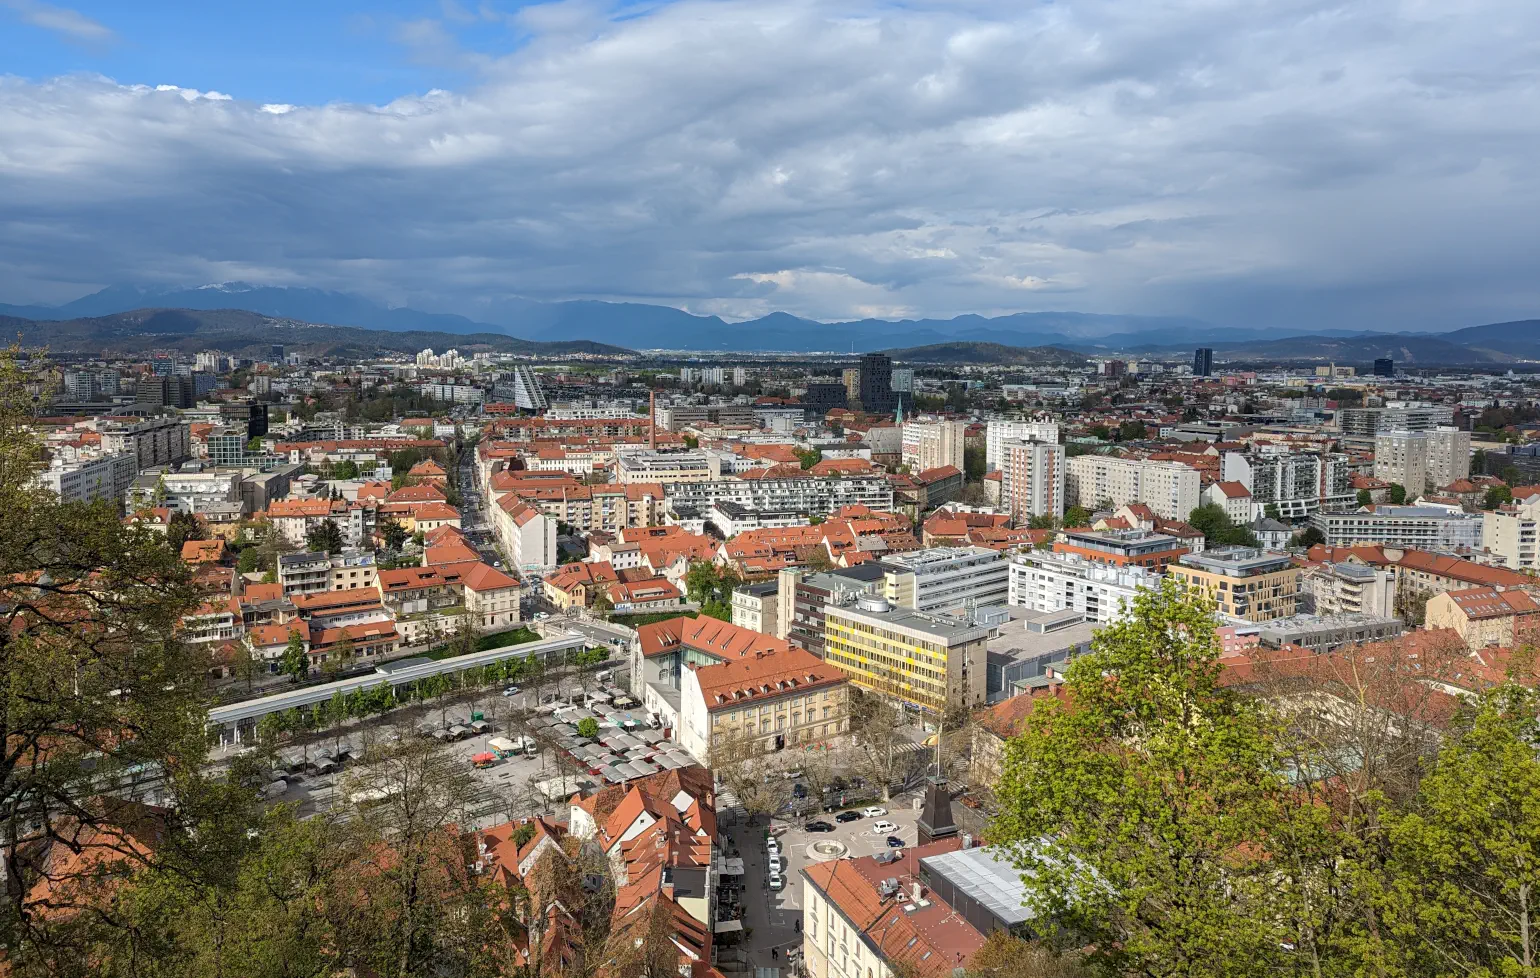 A sunny view overlooking a European city with classic and modern architecture, with mountains in the background